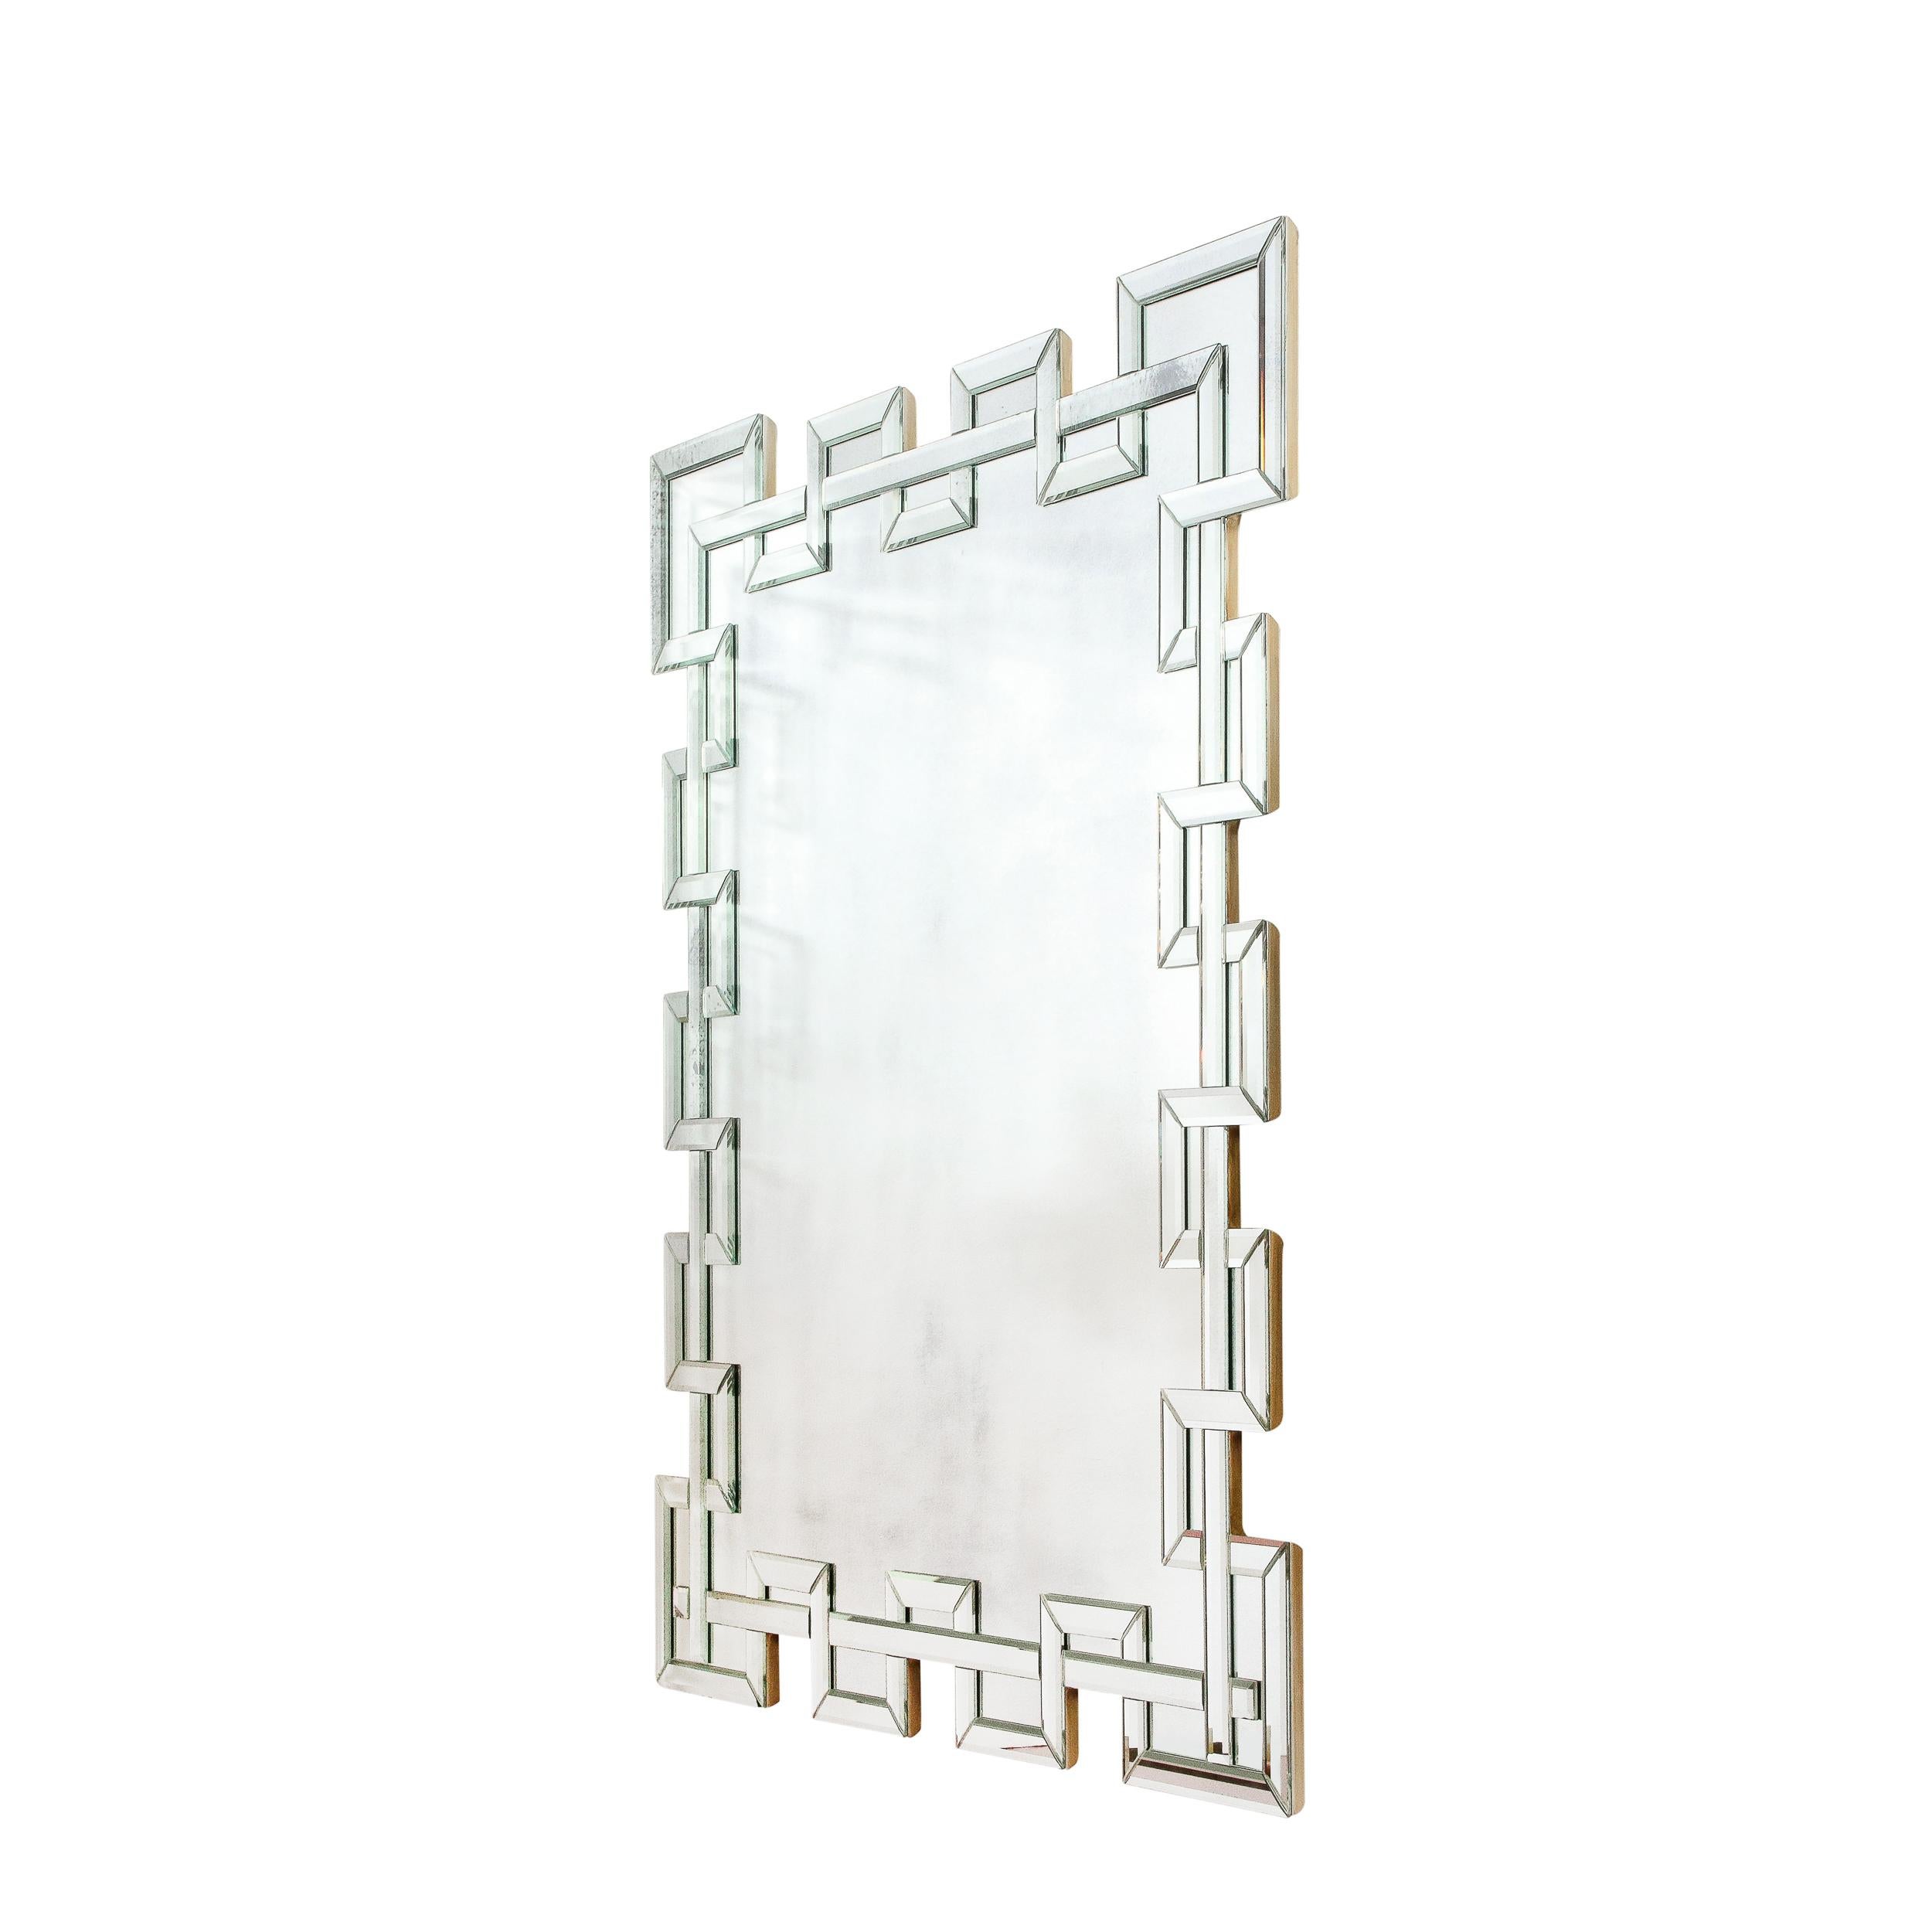 This stunning and graphic crenellated modernist mirror was realized in the United States during the late 20th century. It features a rectangular form with an interlaced geometric border in which beveled linear segments of mirror weave in and out of